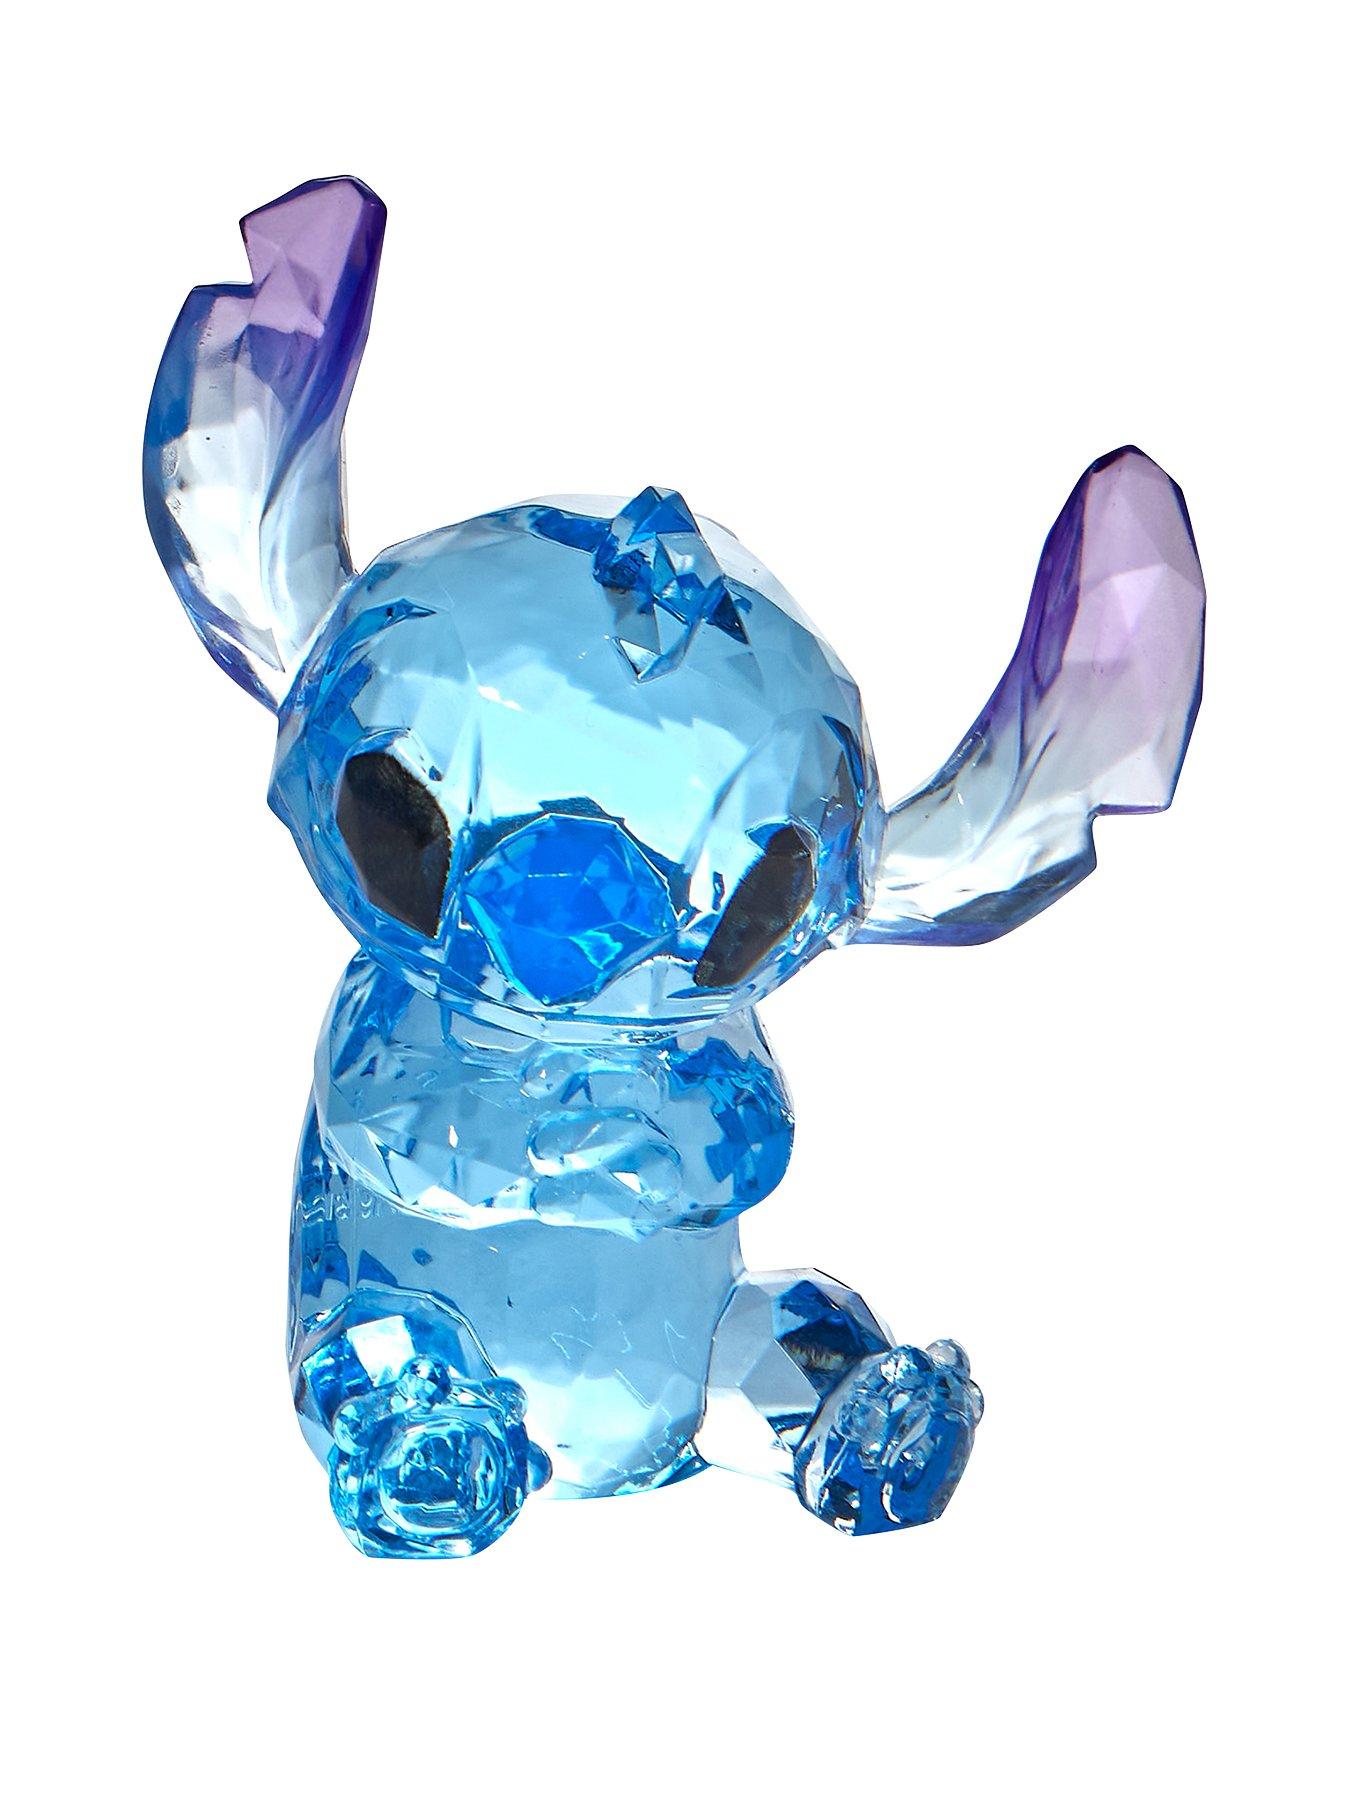 Results 121 - 180 of 182 for Lilo & Stitch Gifts